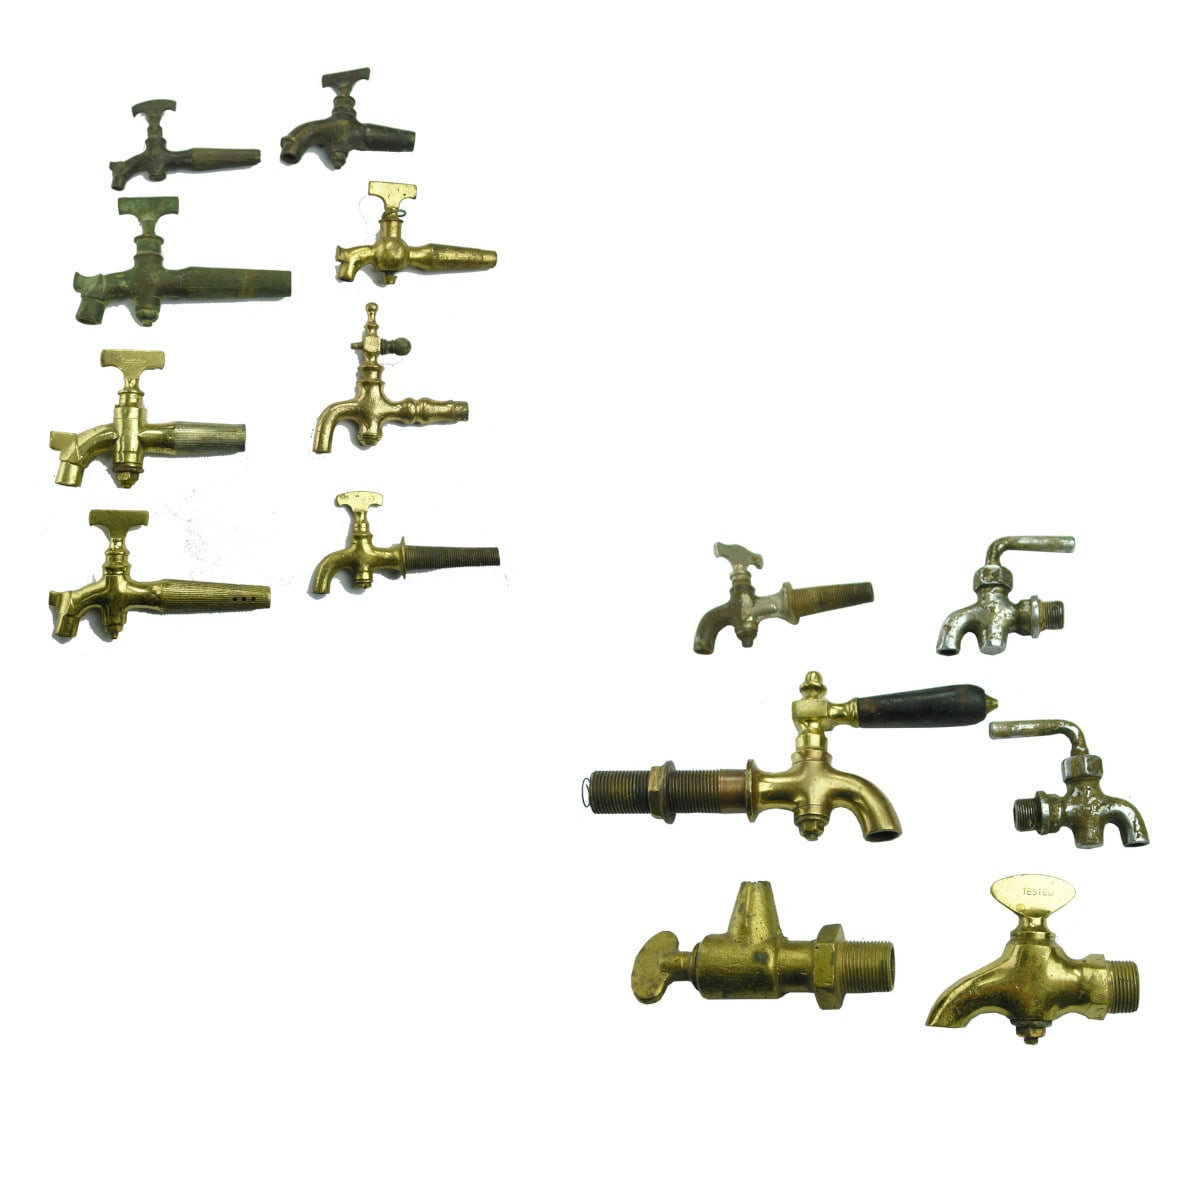 14 Brass & metal Taps. Barrel and other types. Some nice clean polished ones.